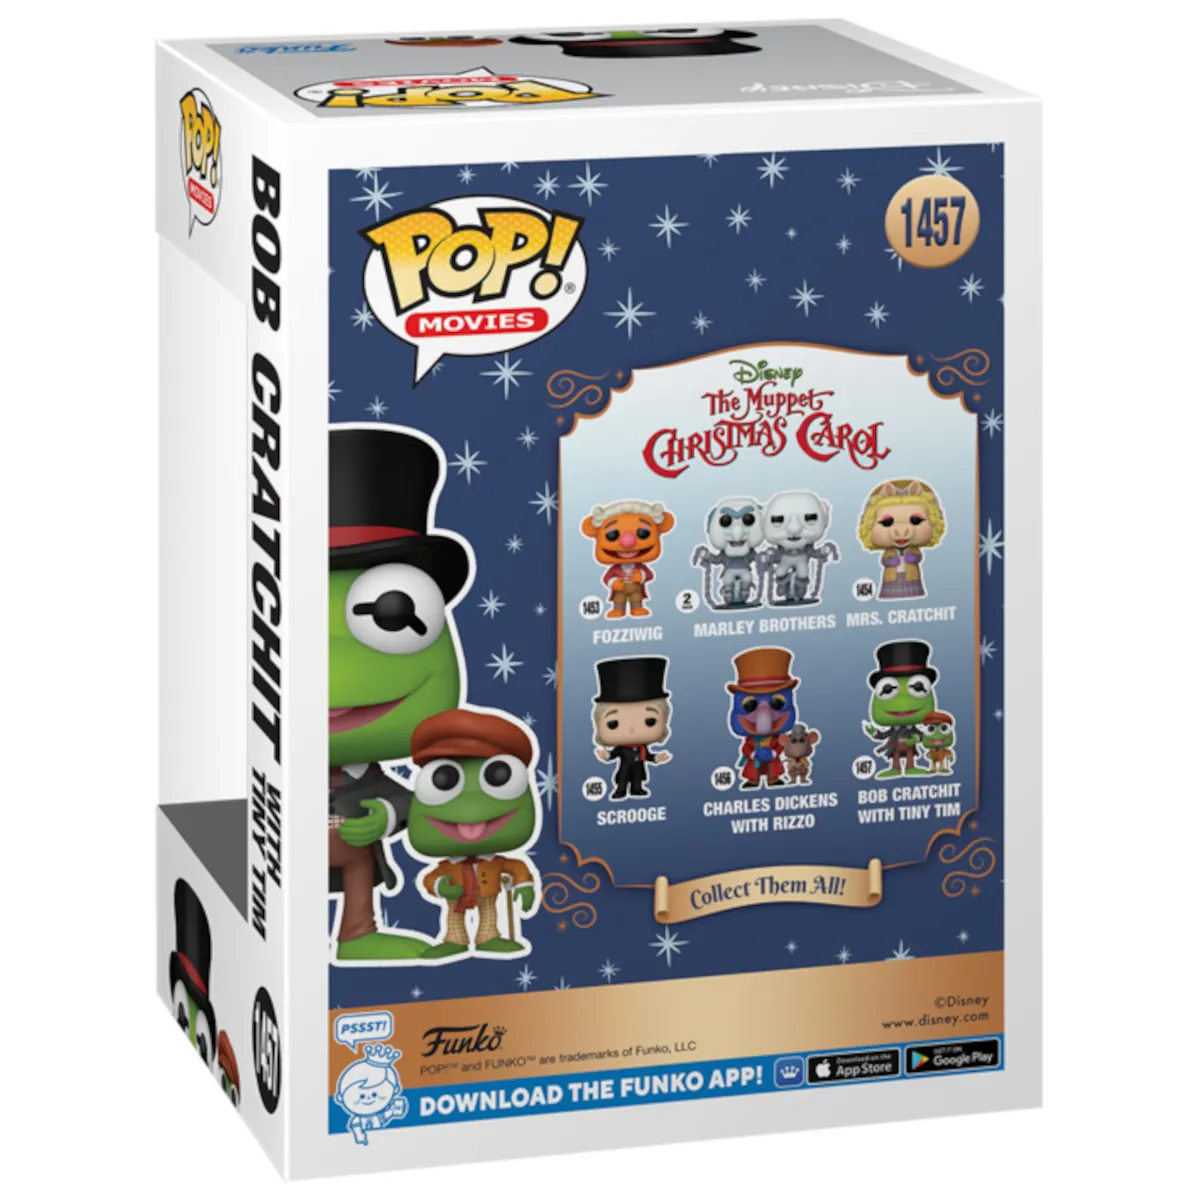 Funko Pop Movies The Muppets Christmas Carol Bob Cratchit With Tiny Tim Collectable Vinyl Figure Back